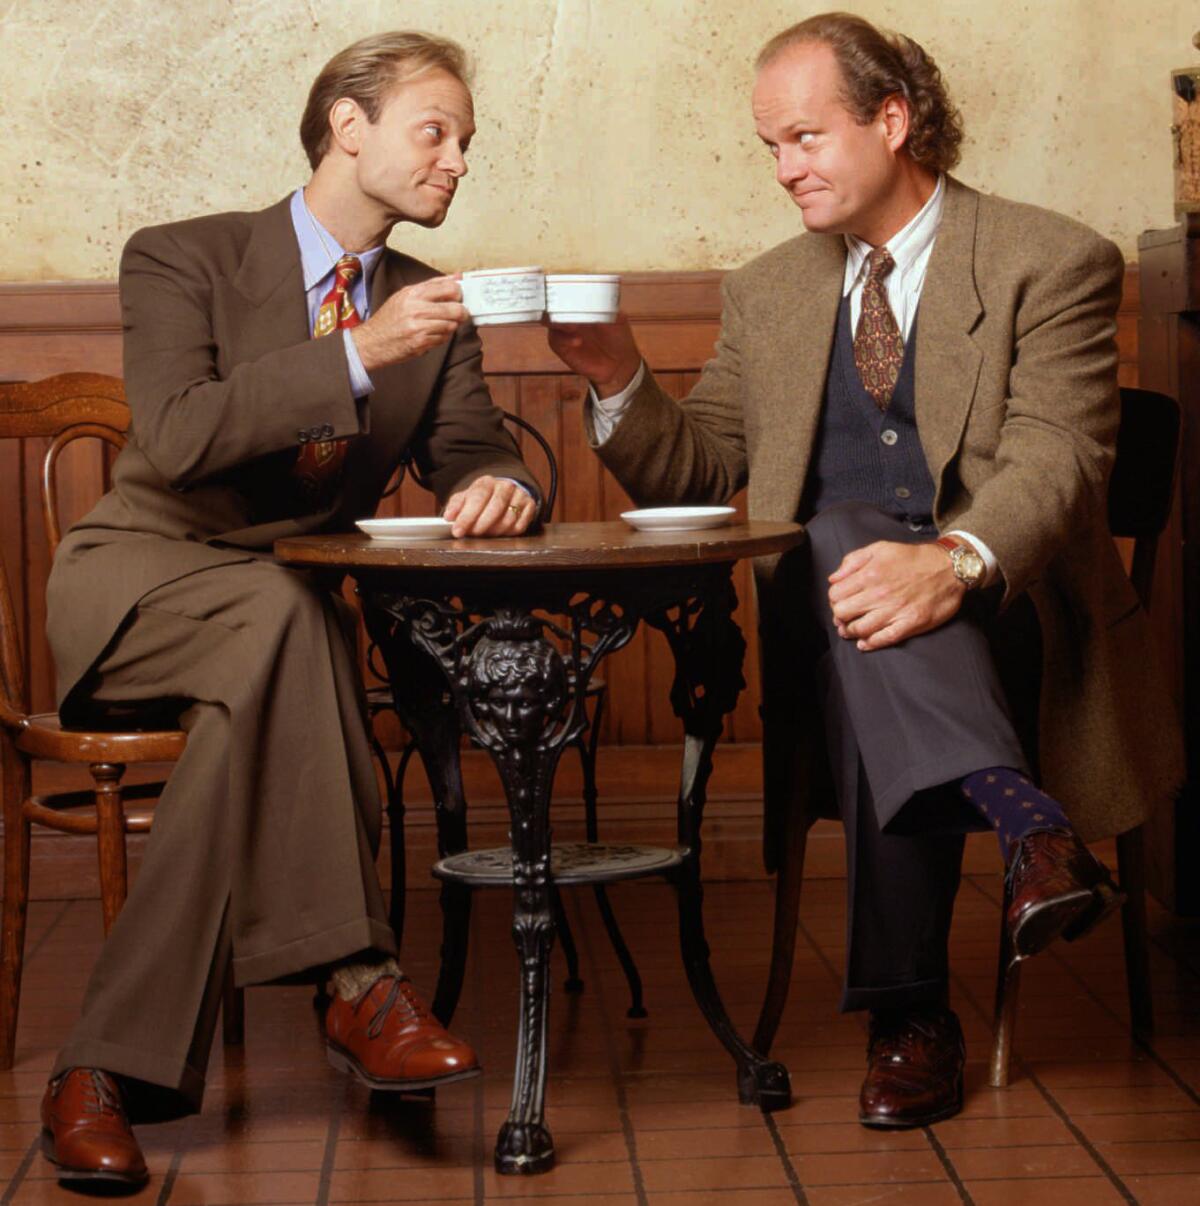 David Hyde Pierce, left, and Kelsey Grammer, both wearing suits and ties, sitting at a table and toasting with tea cups